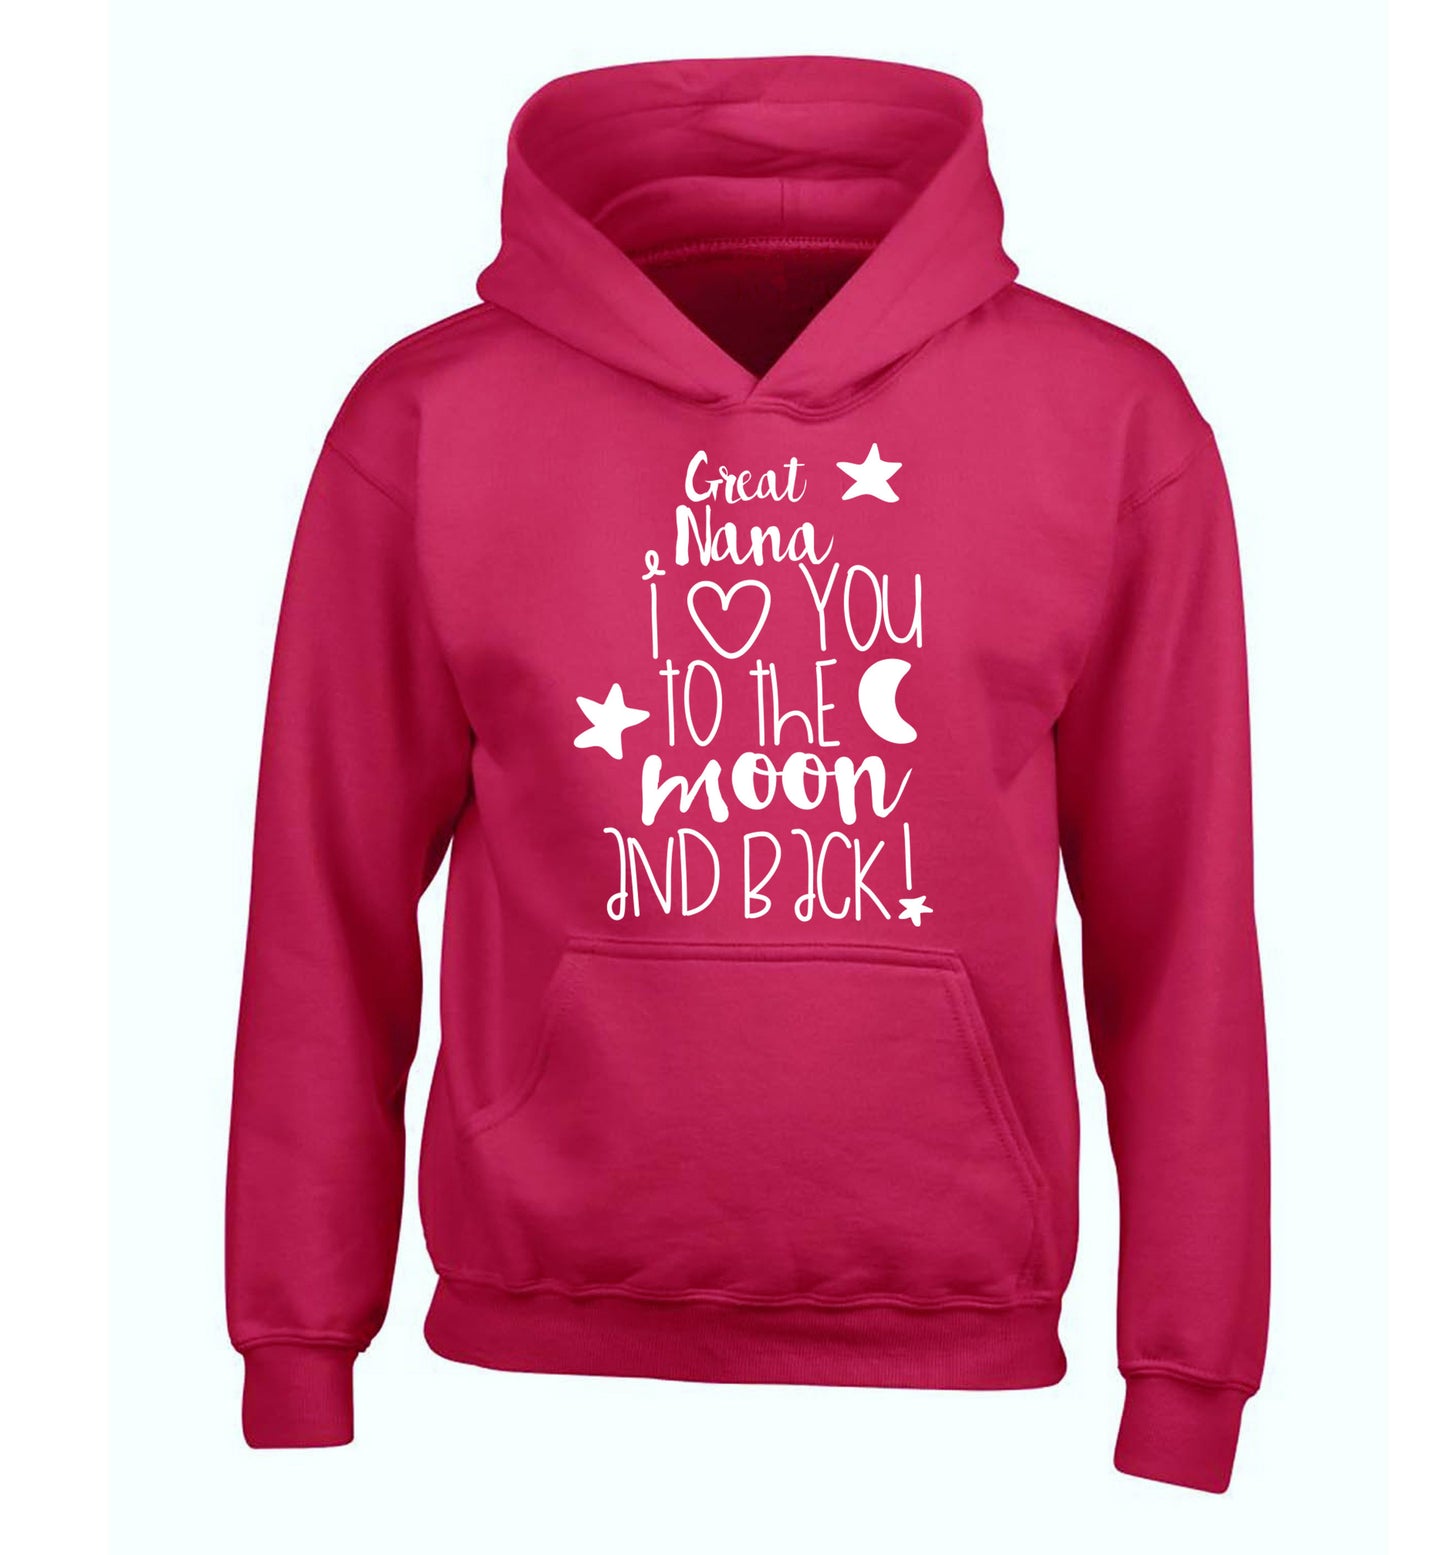 Great Nana I love you to the moon and back children's pink hoodie 12-14 Years